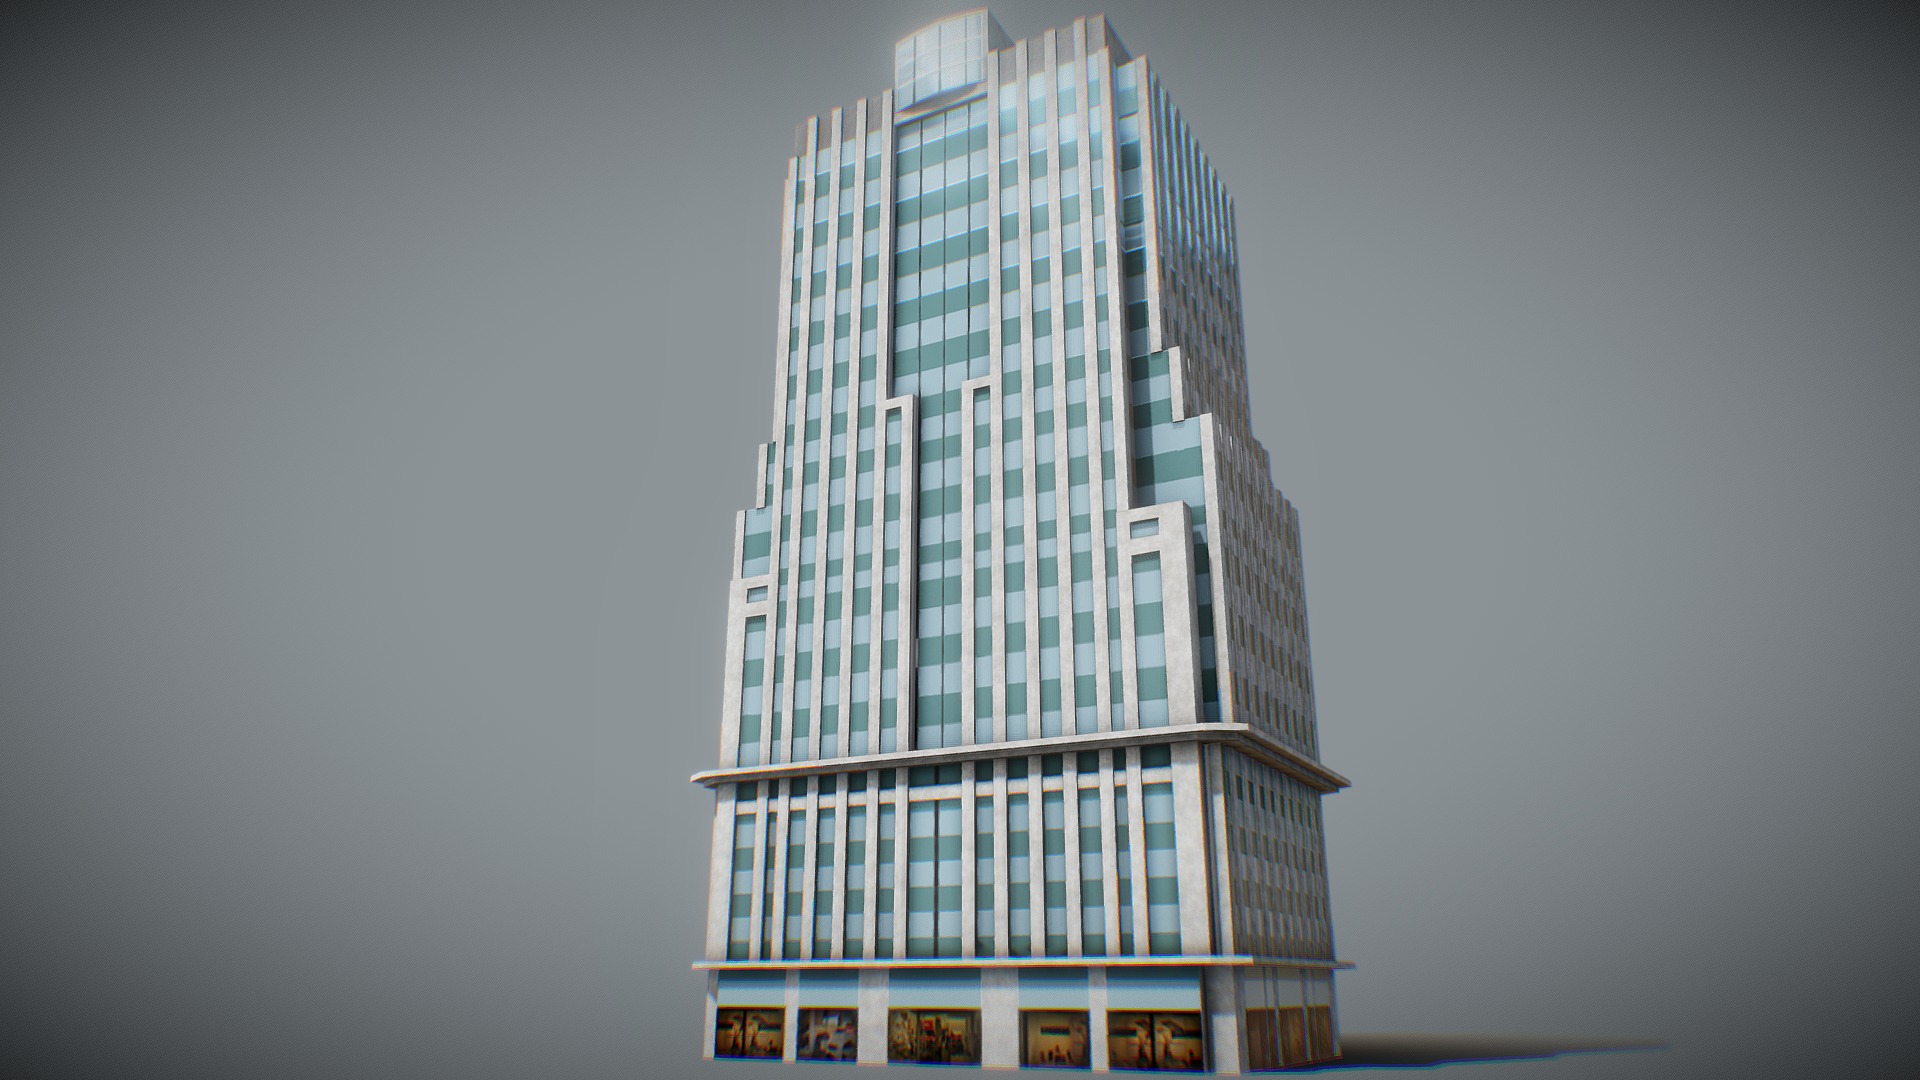 3D model Low poly environment building - This is a 3D model of the Low poly environment building. The 3D model is about a tall building with many windows.